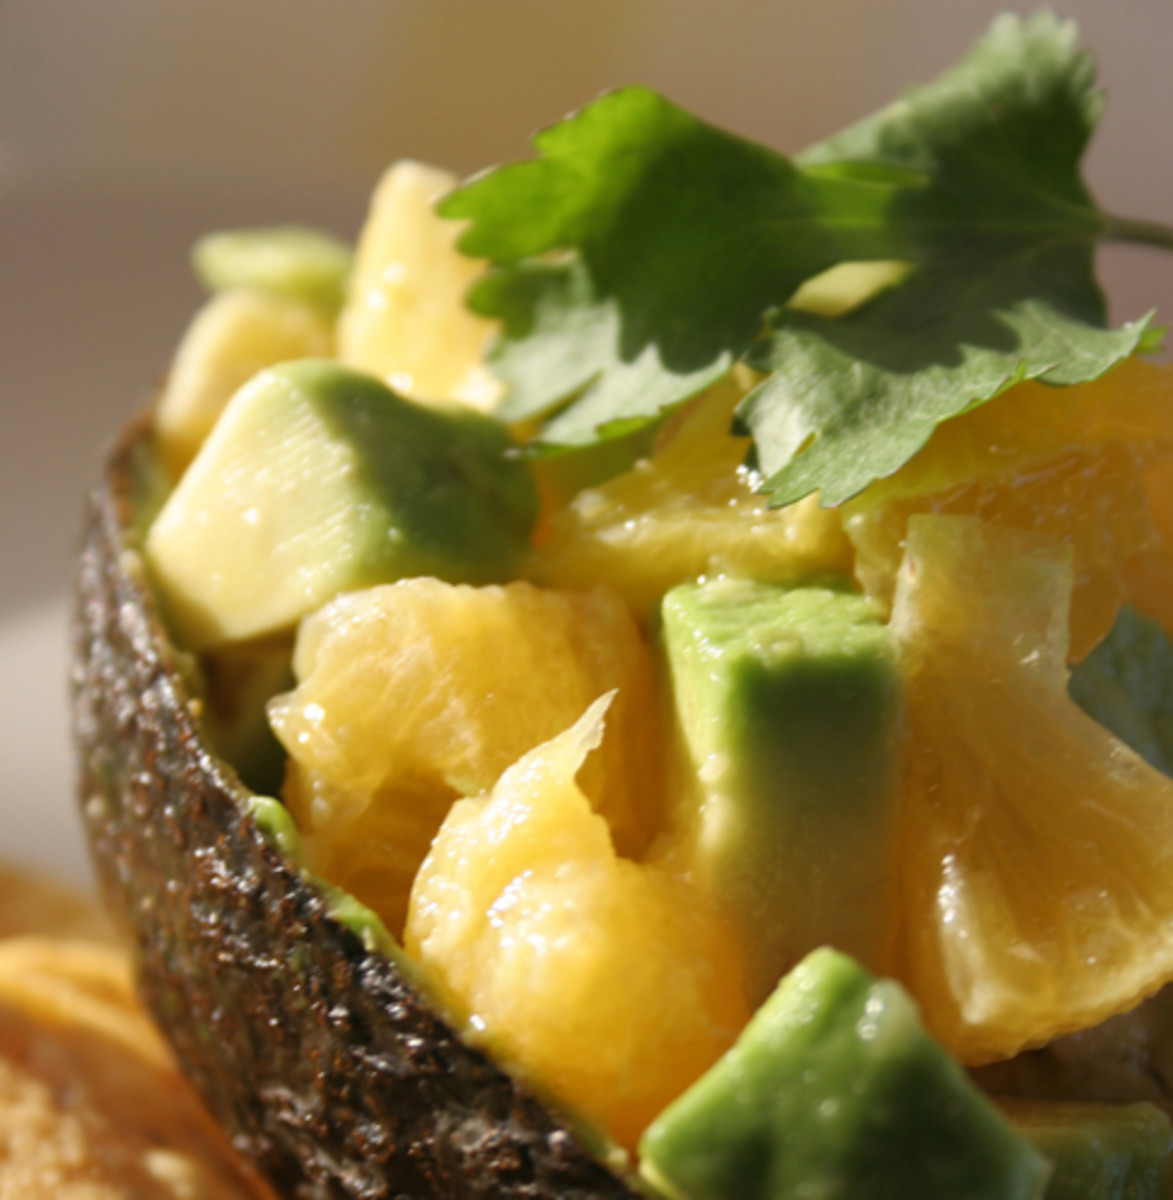 Exotic Mexican Avocado and Tangerine Salad